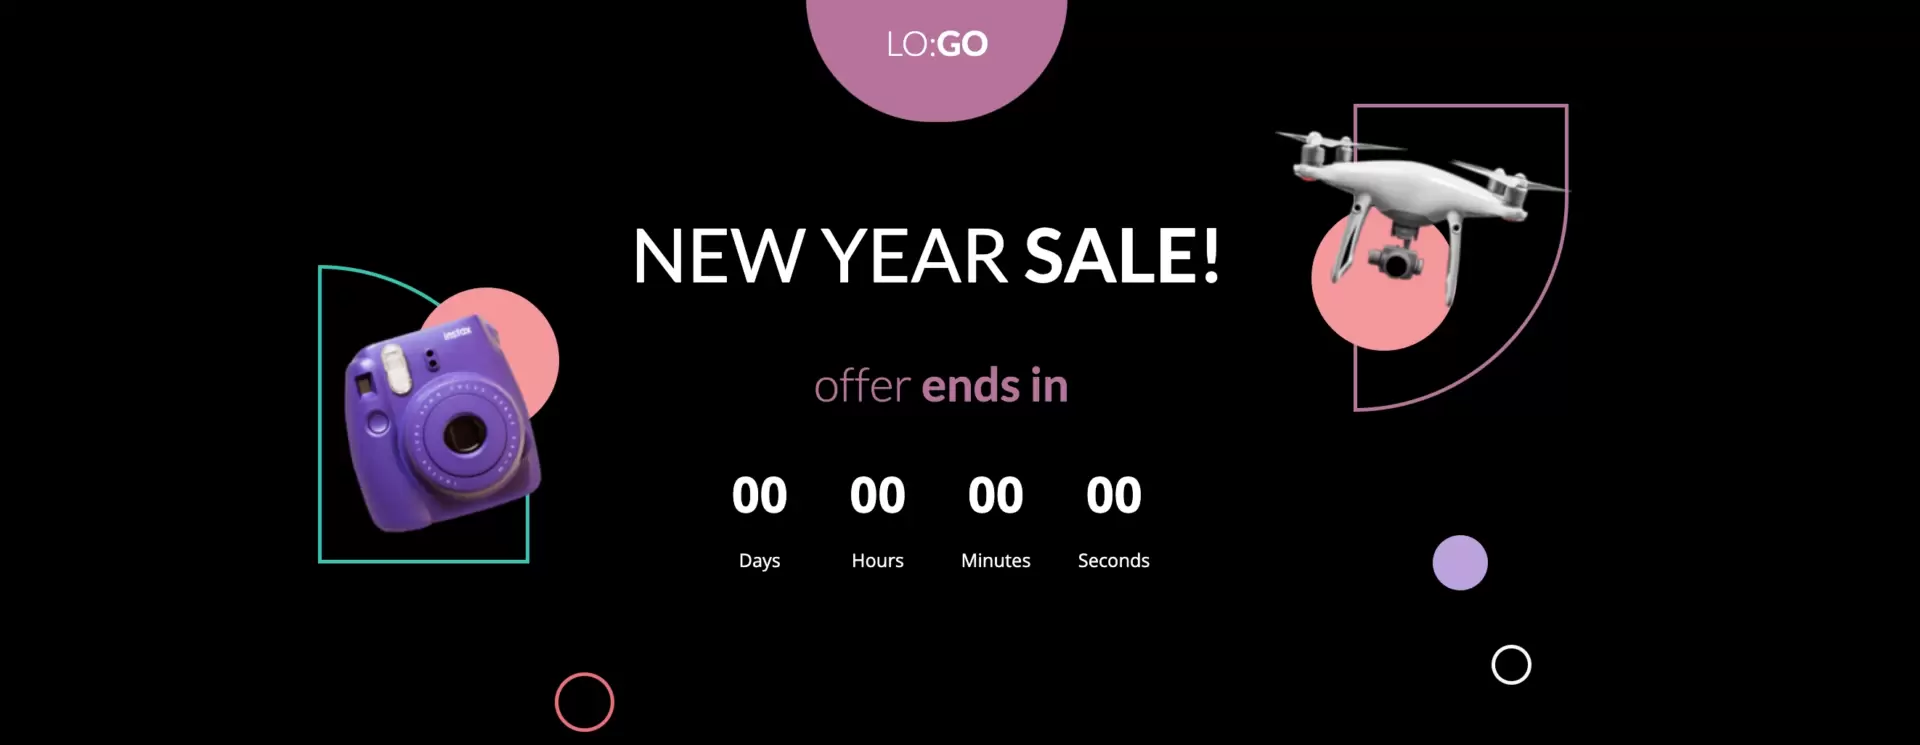 sales landing page with a countdown timer